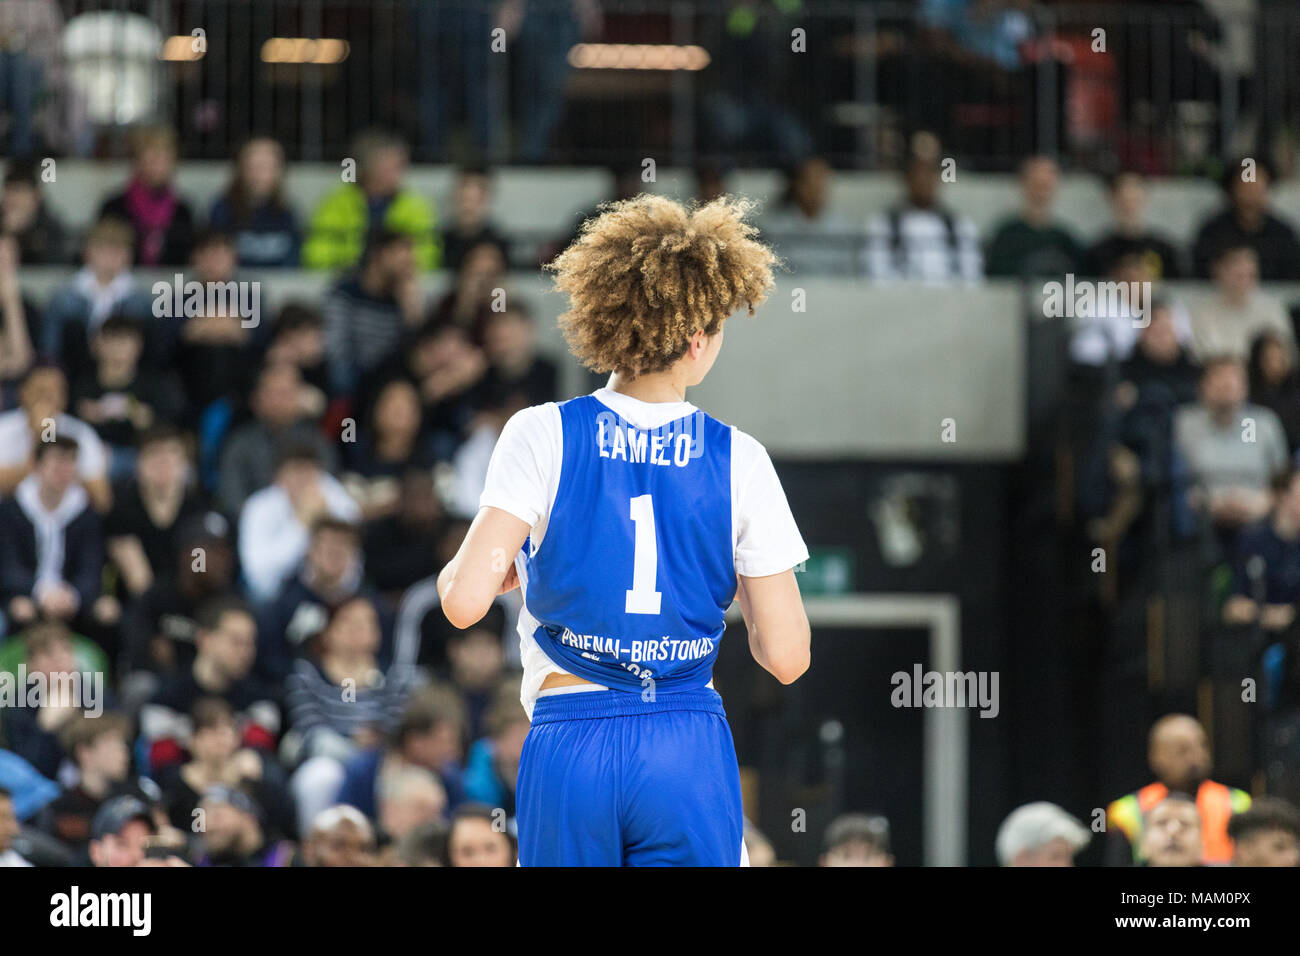 Copper Box Arena, London, 2nd April 2018. The London Lions played an  international friendly game against Lithuanian LKL side BC Vytautas Prienu.  US born brothers Lamelo and LiAngelo Ball, sons of Lavar